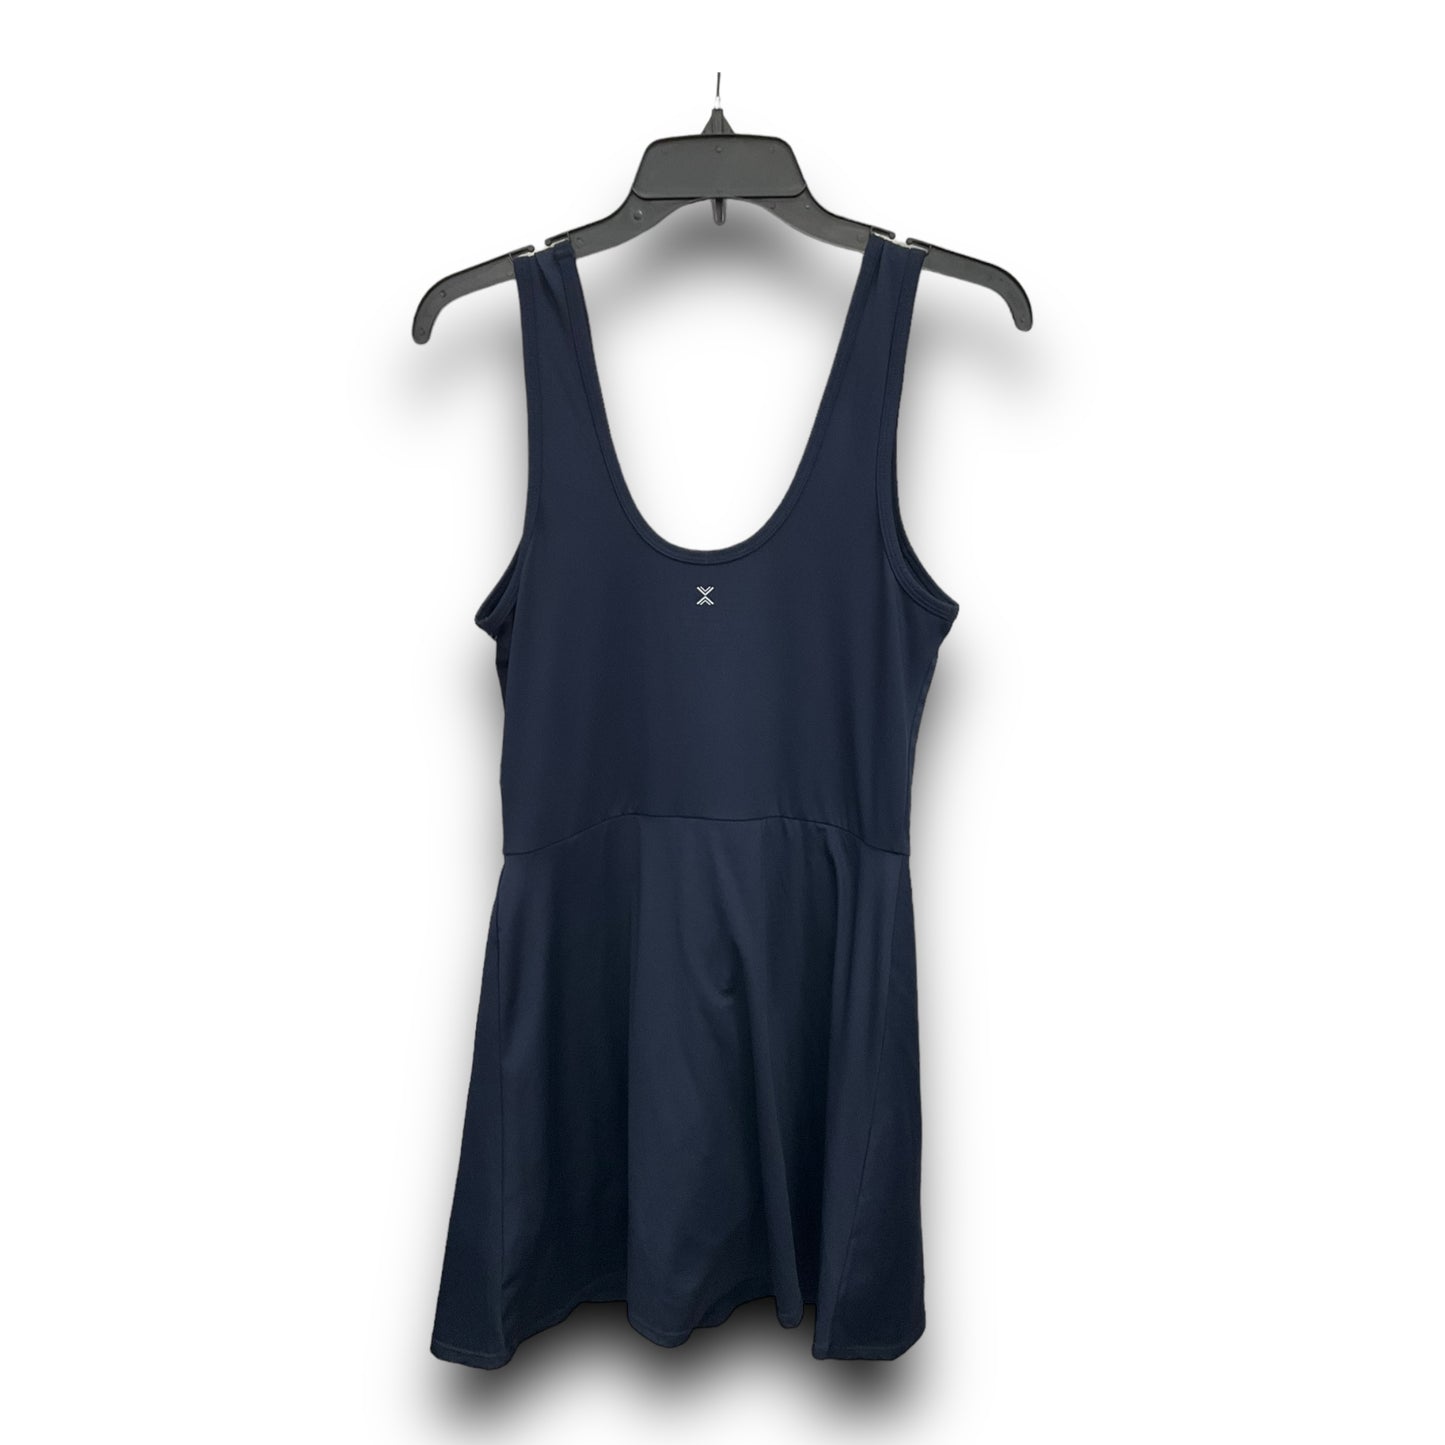 Athletic Dress By Xersion  Size: M